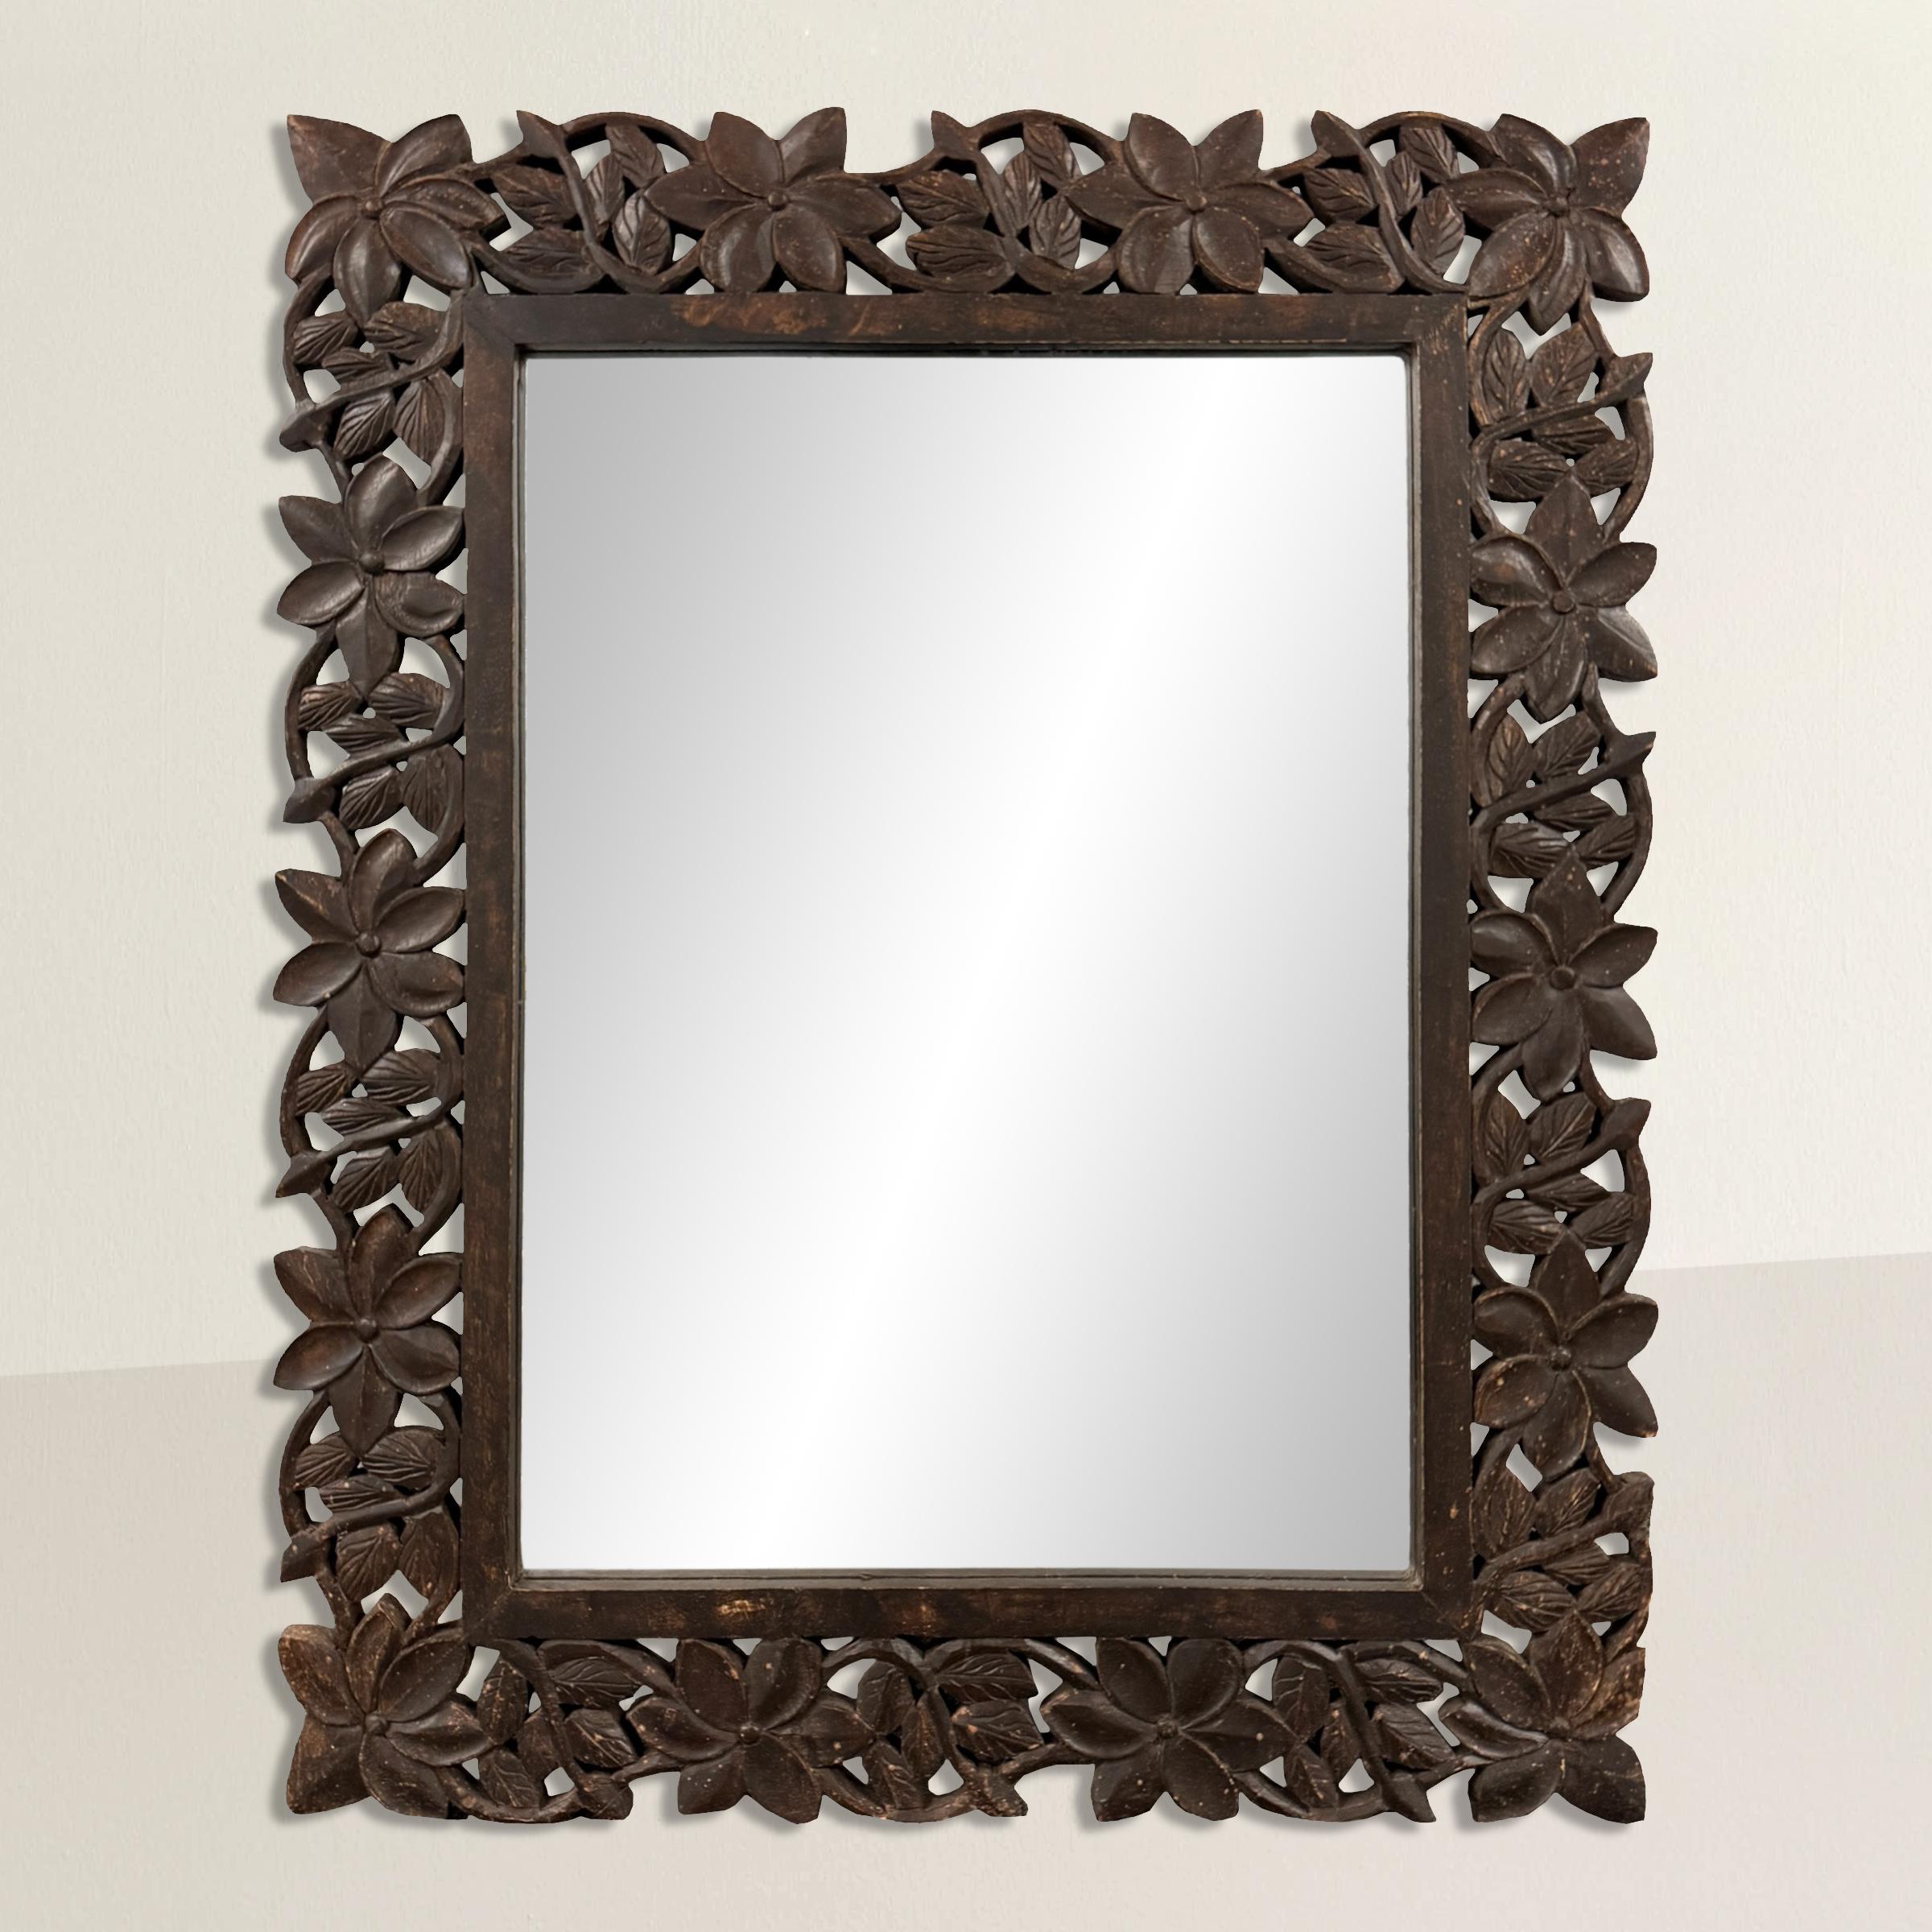 This 20th-century hand-carved wood framed mirror is a stunning blend of elegance and craftsmanship. The frame features a repeated floral and scrolling vine pattern, delicately carved to encircle the mirror, adding a touch of timeless beauty to any